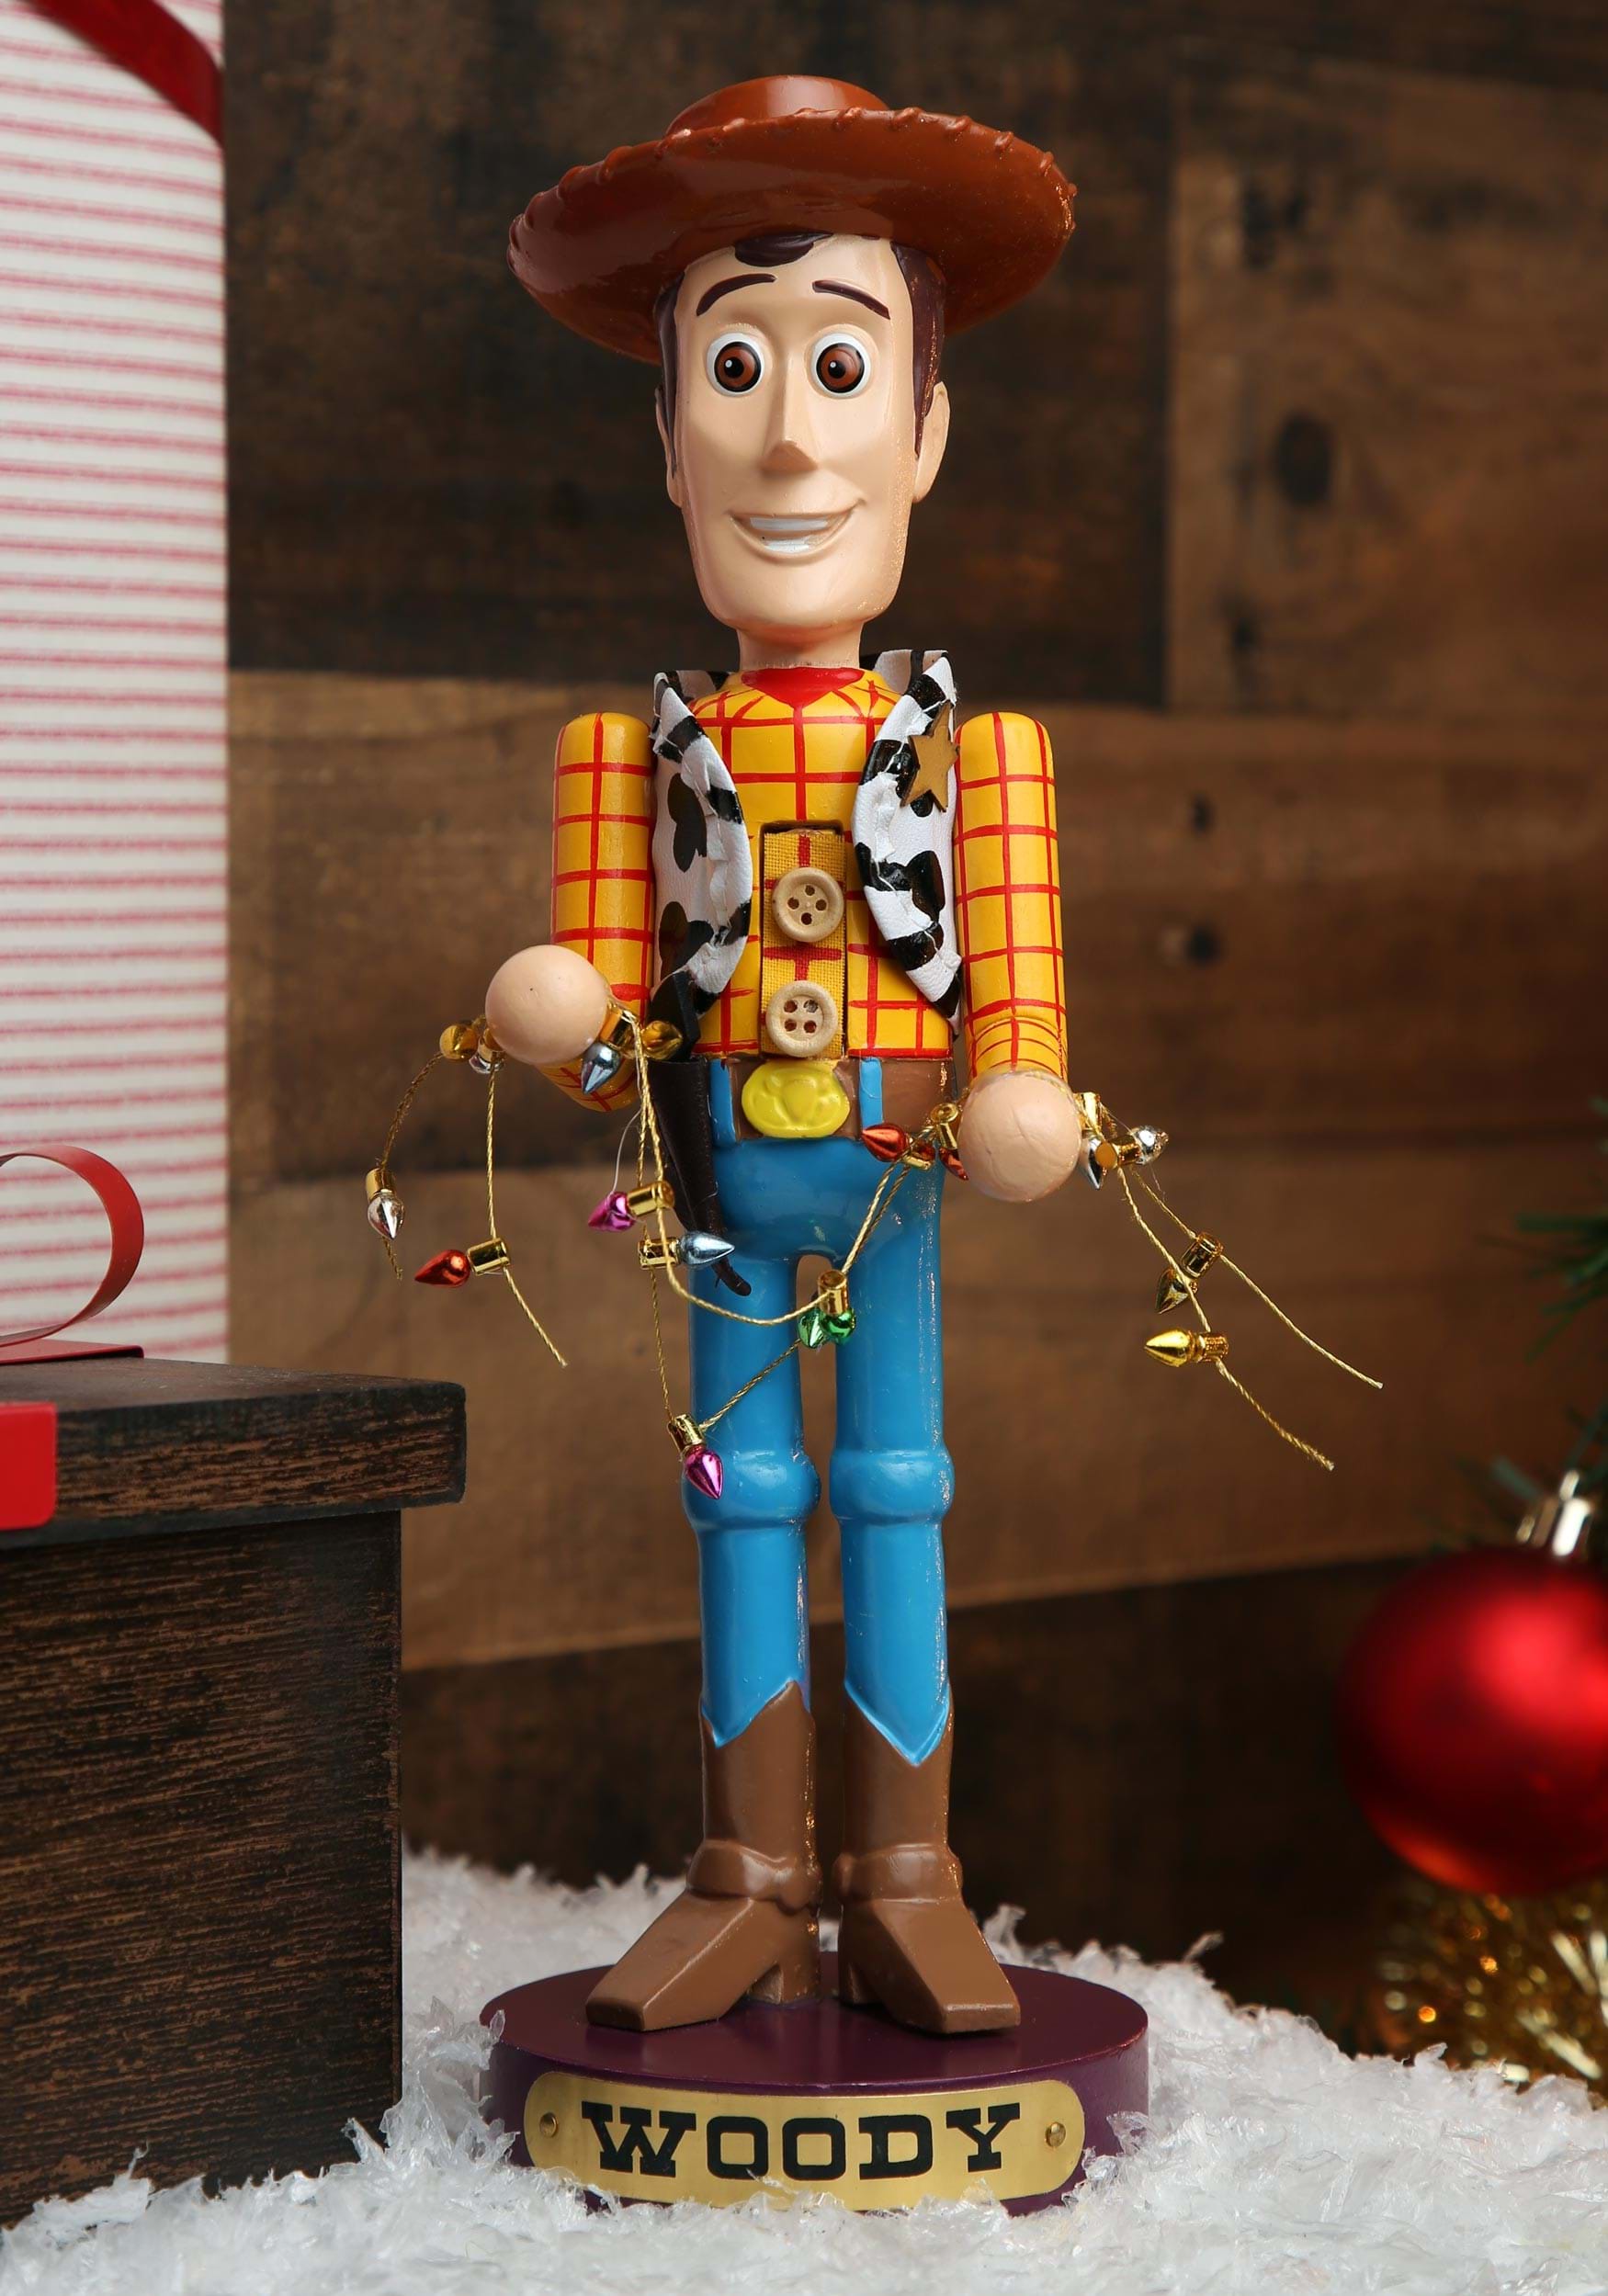 11 Inch Woody Nutcracker from Toy Story